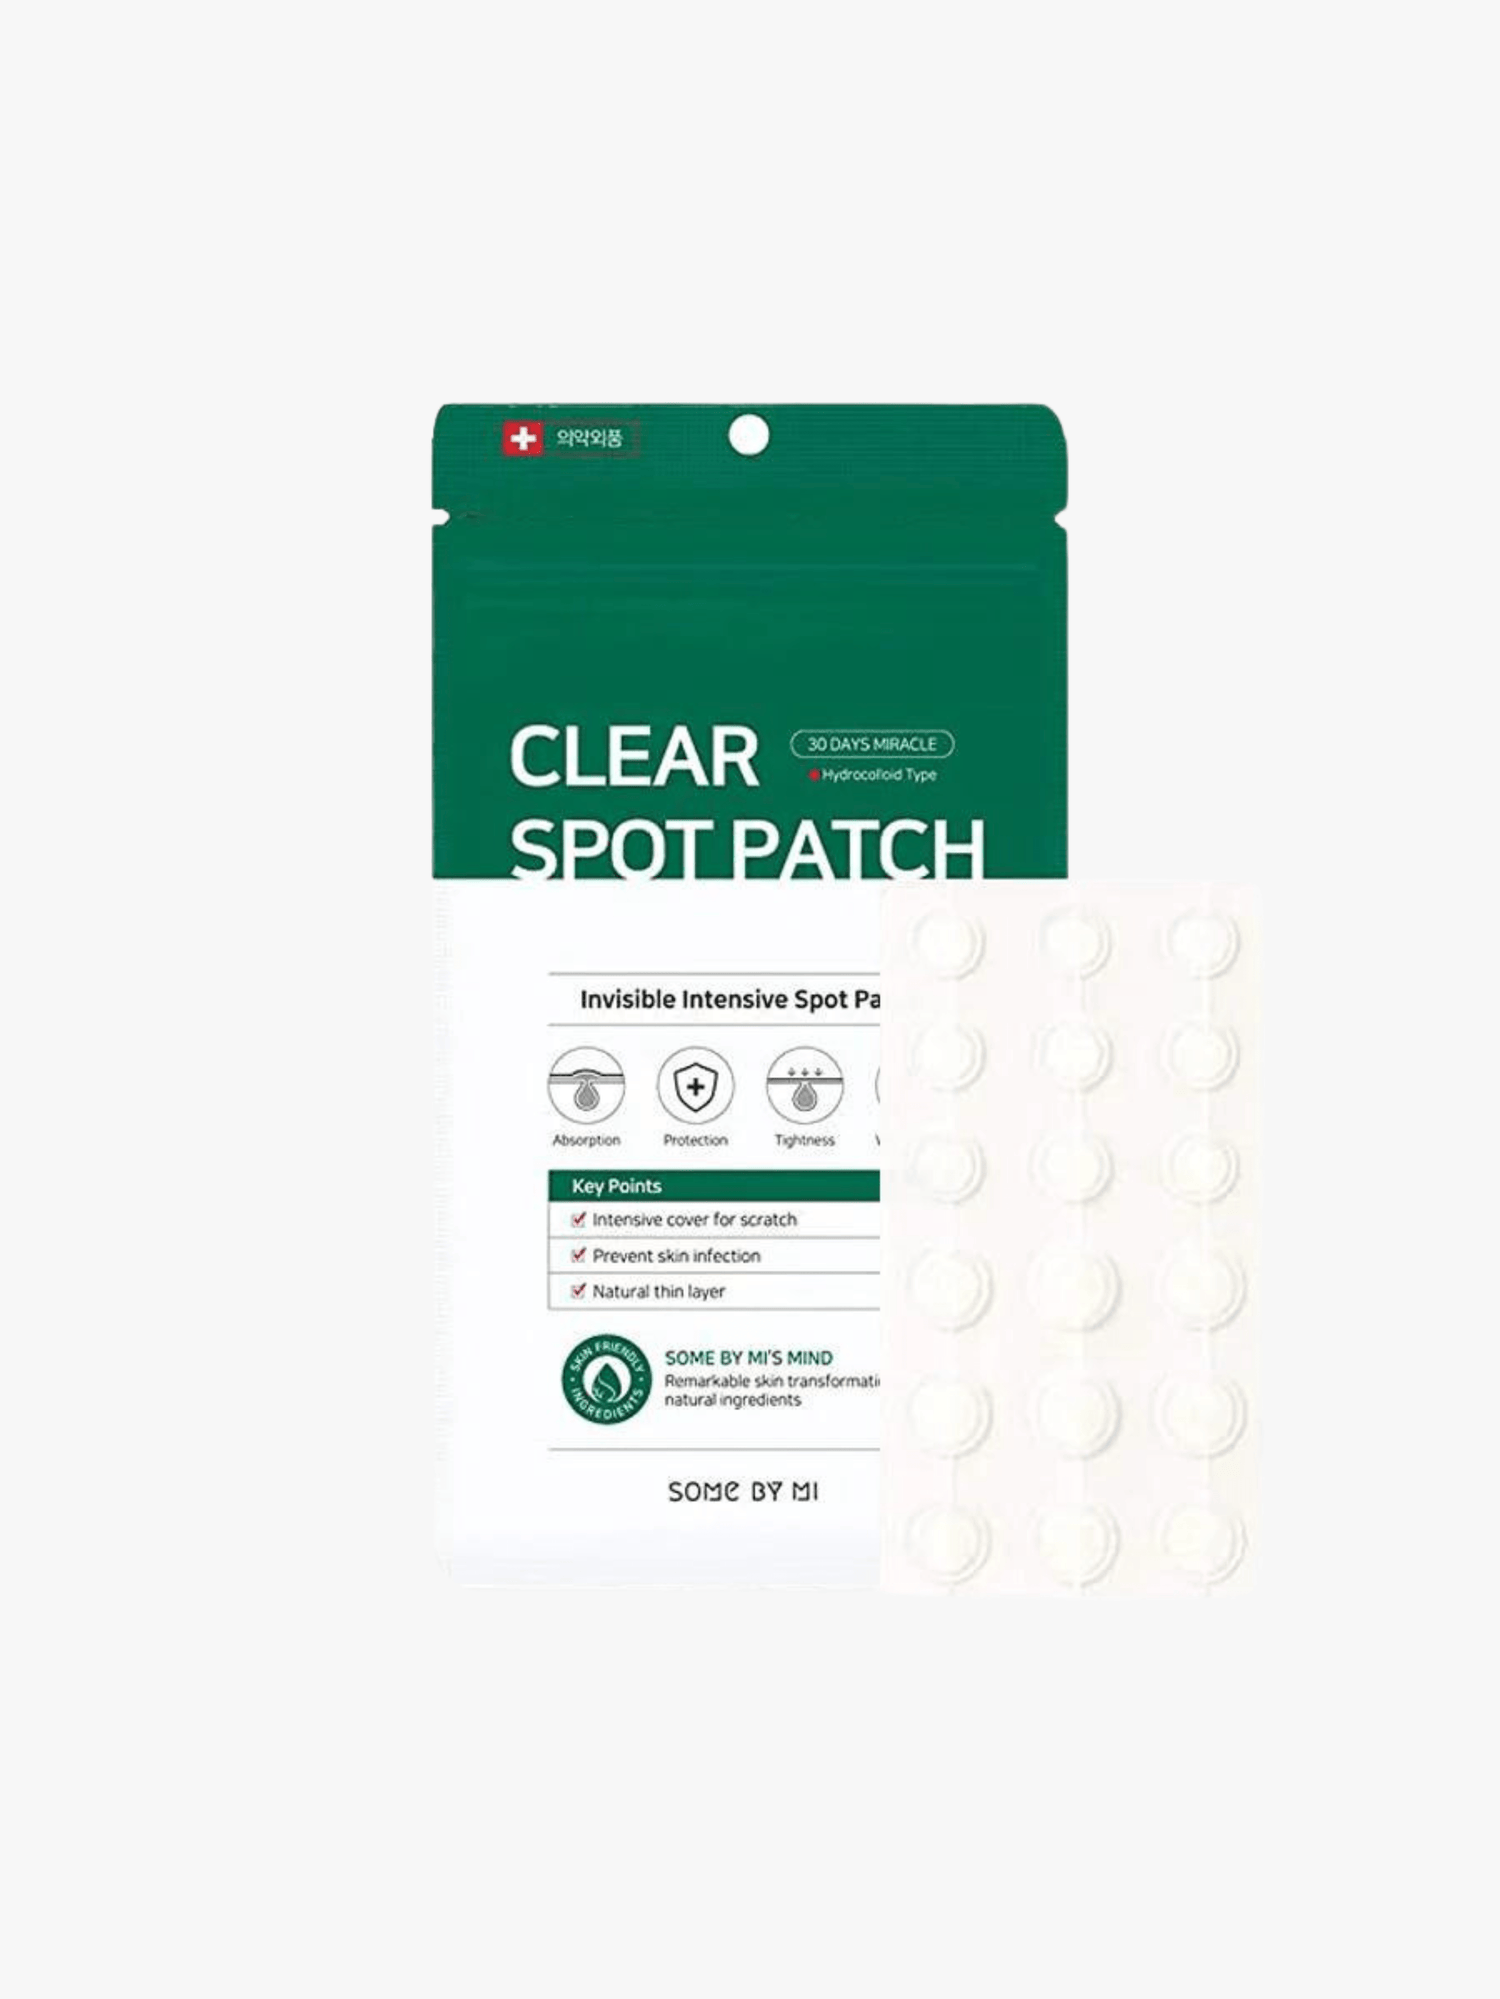 Some By Mi - Pimple patches - 30 days Miracle Clear Spot patches